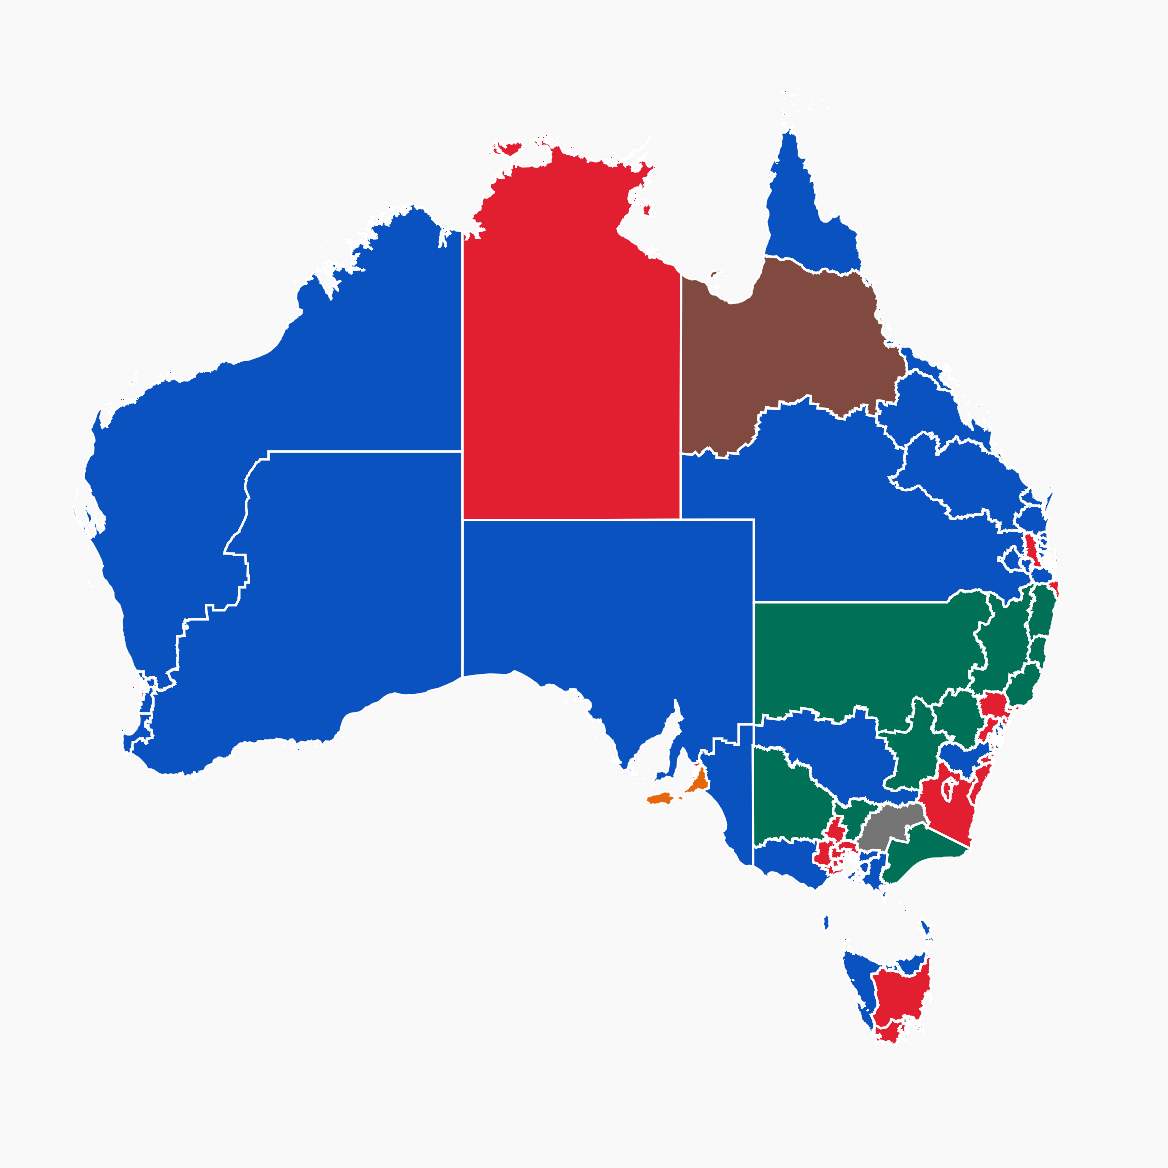 The map is divided up into electorates, and colour-coded depending on who won the seat.